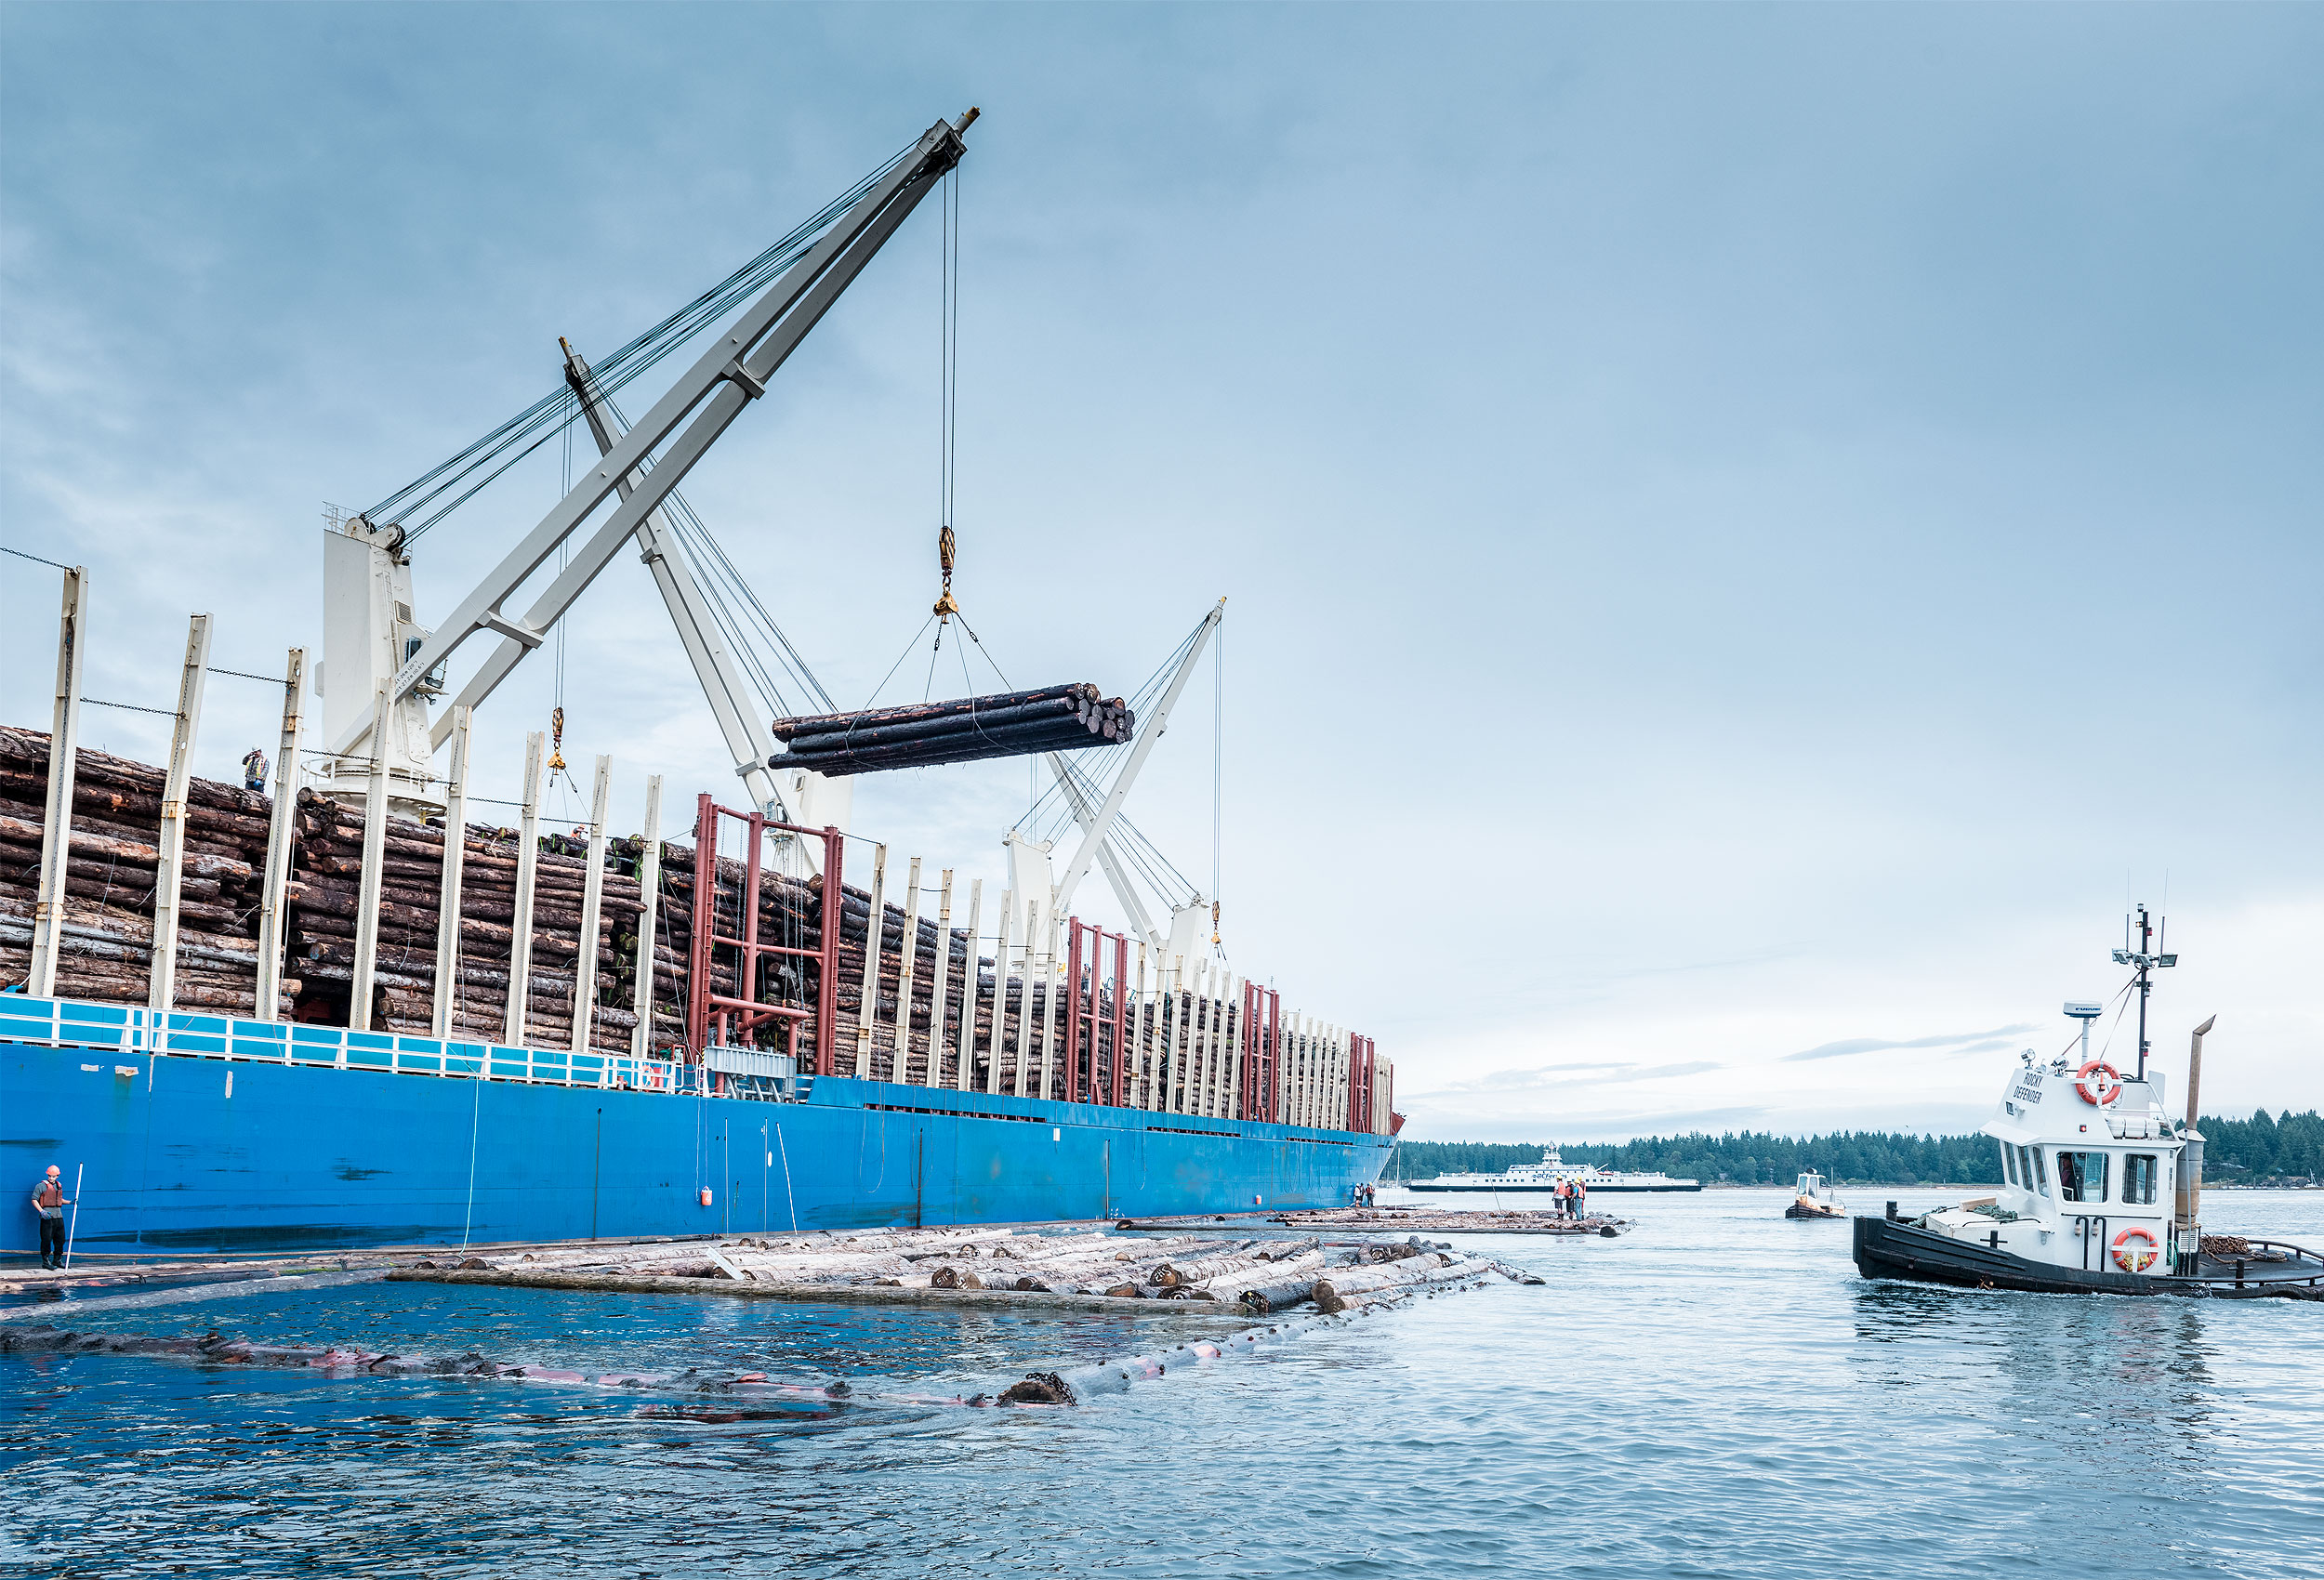 Loading ship with lumber by corporate industrial photographer Kristopher Grunert